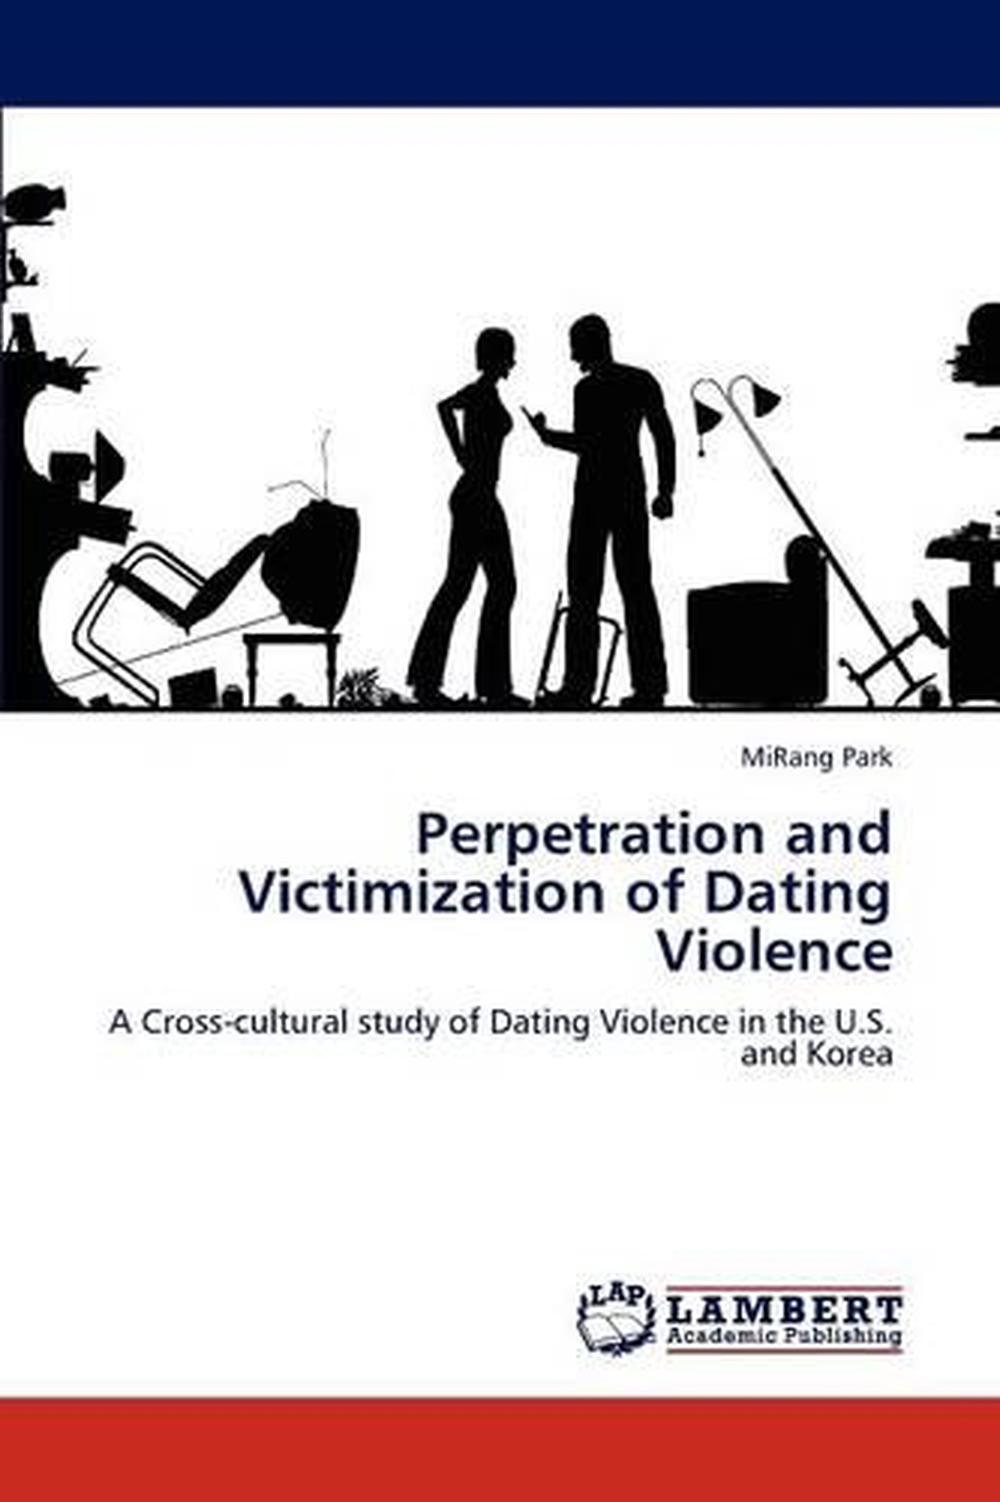 ny dating violence stories